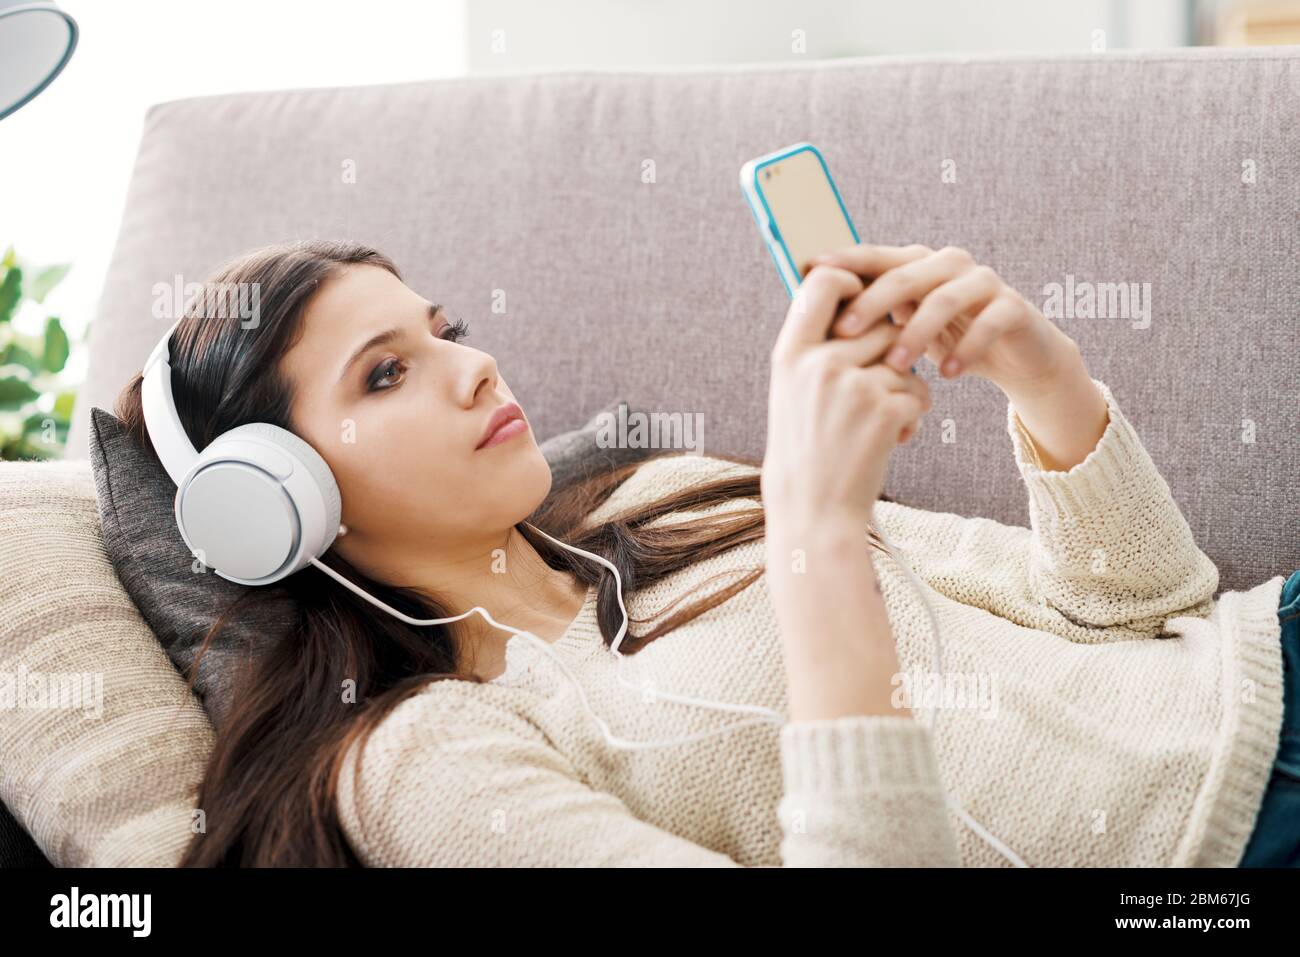 Attractive girl relaxing on the sofa and using apps on her smartphone, she is wearing headphones Stock Photo